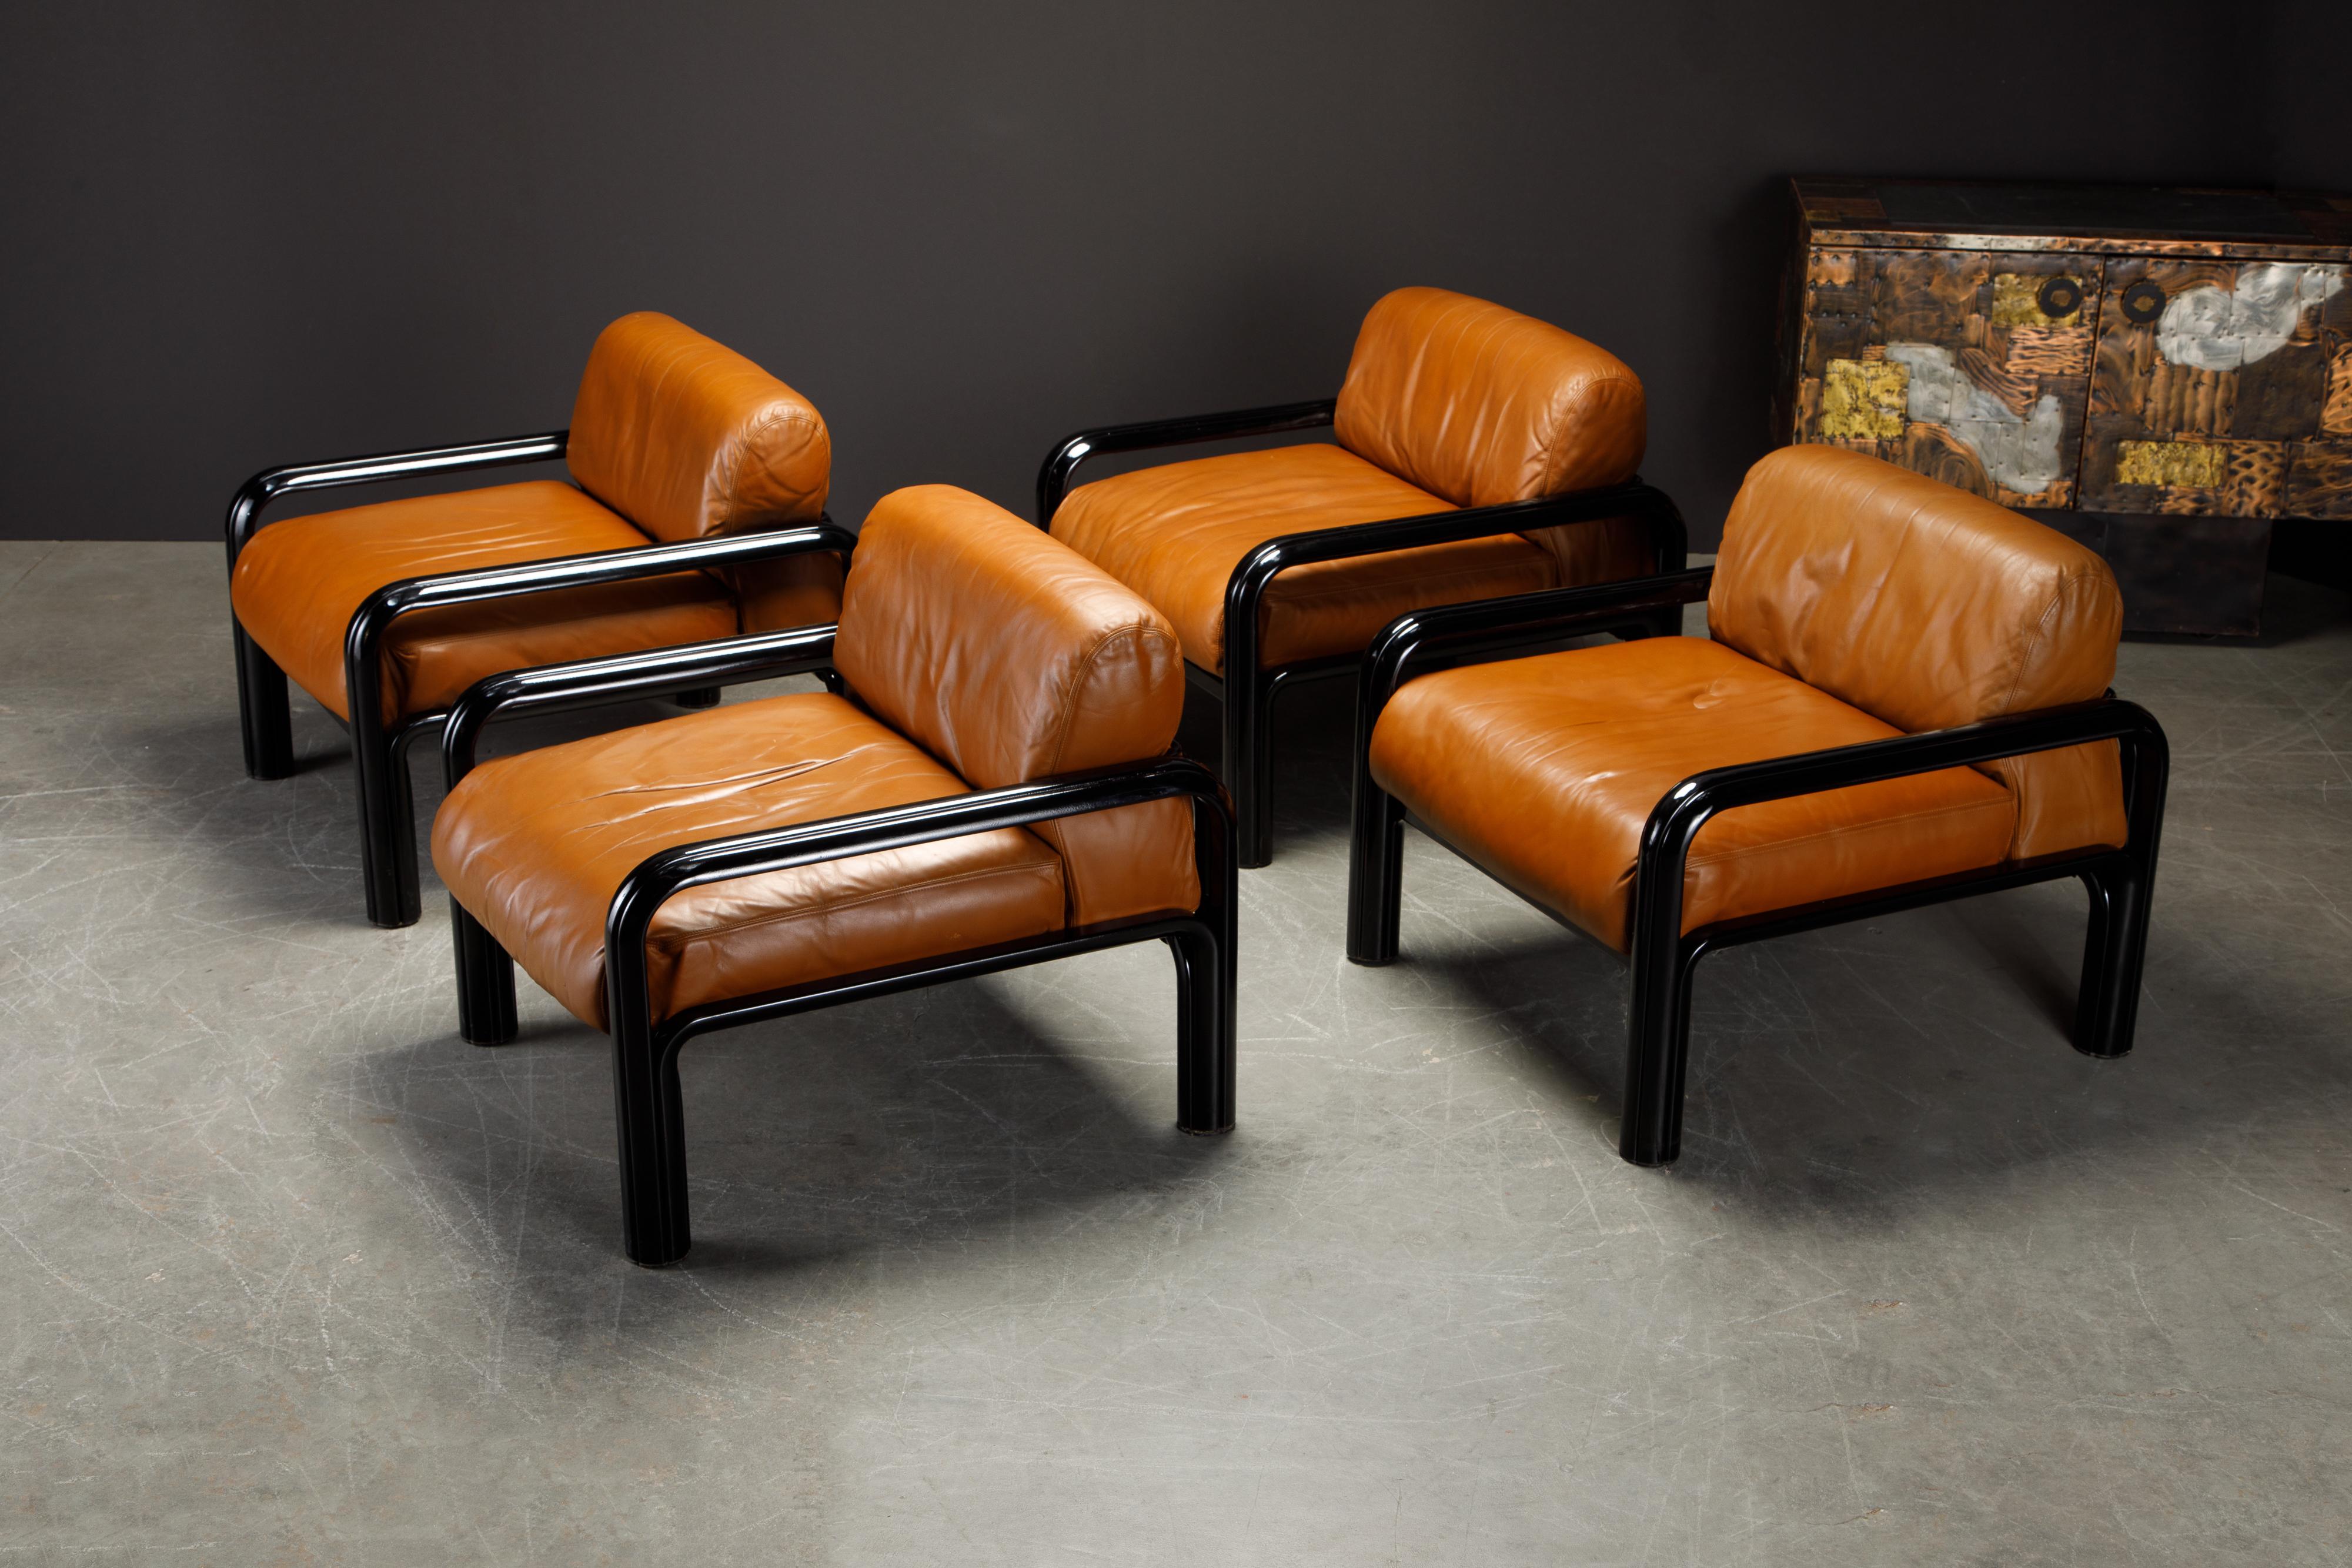 American Set of 4 Gae Aulenti Leather and Steel Lounge Chairs for Knoll, Signed 1980